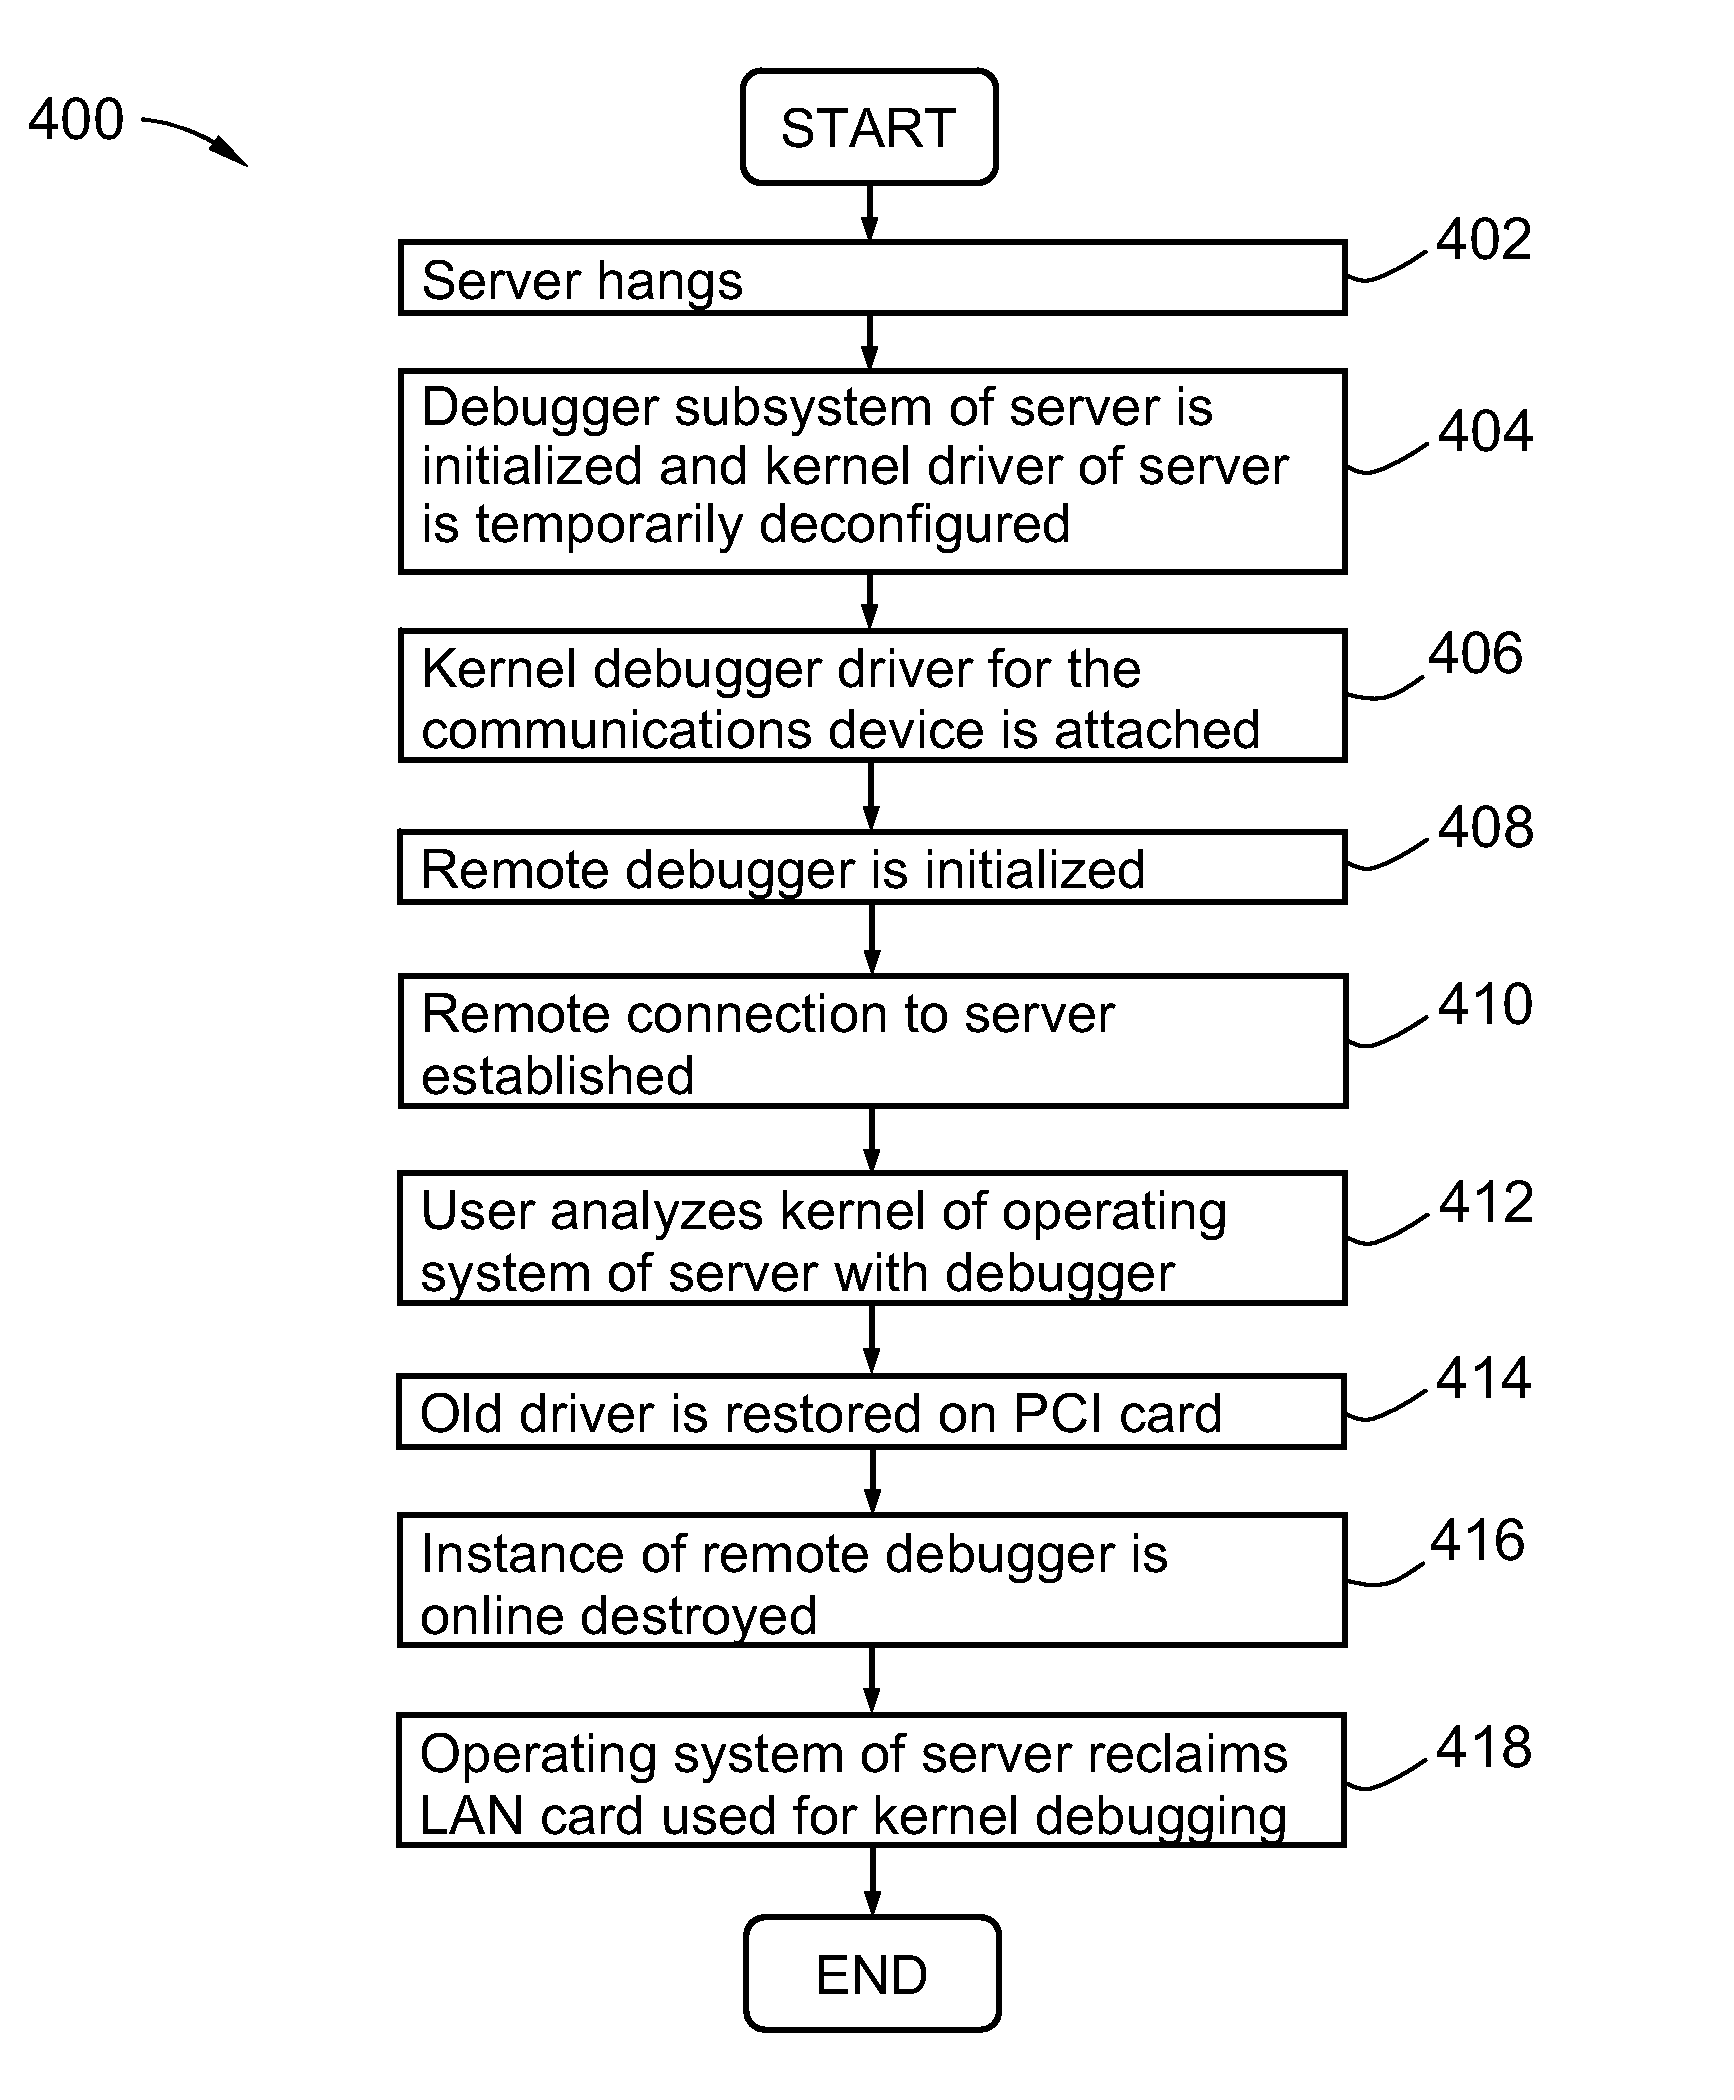 Method and system for remotely debugging a hung or crashed computing system